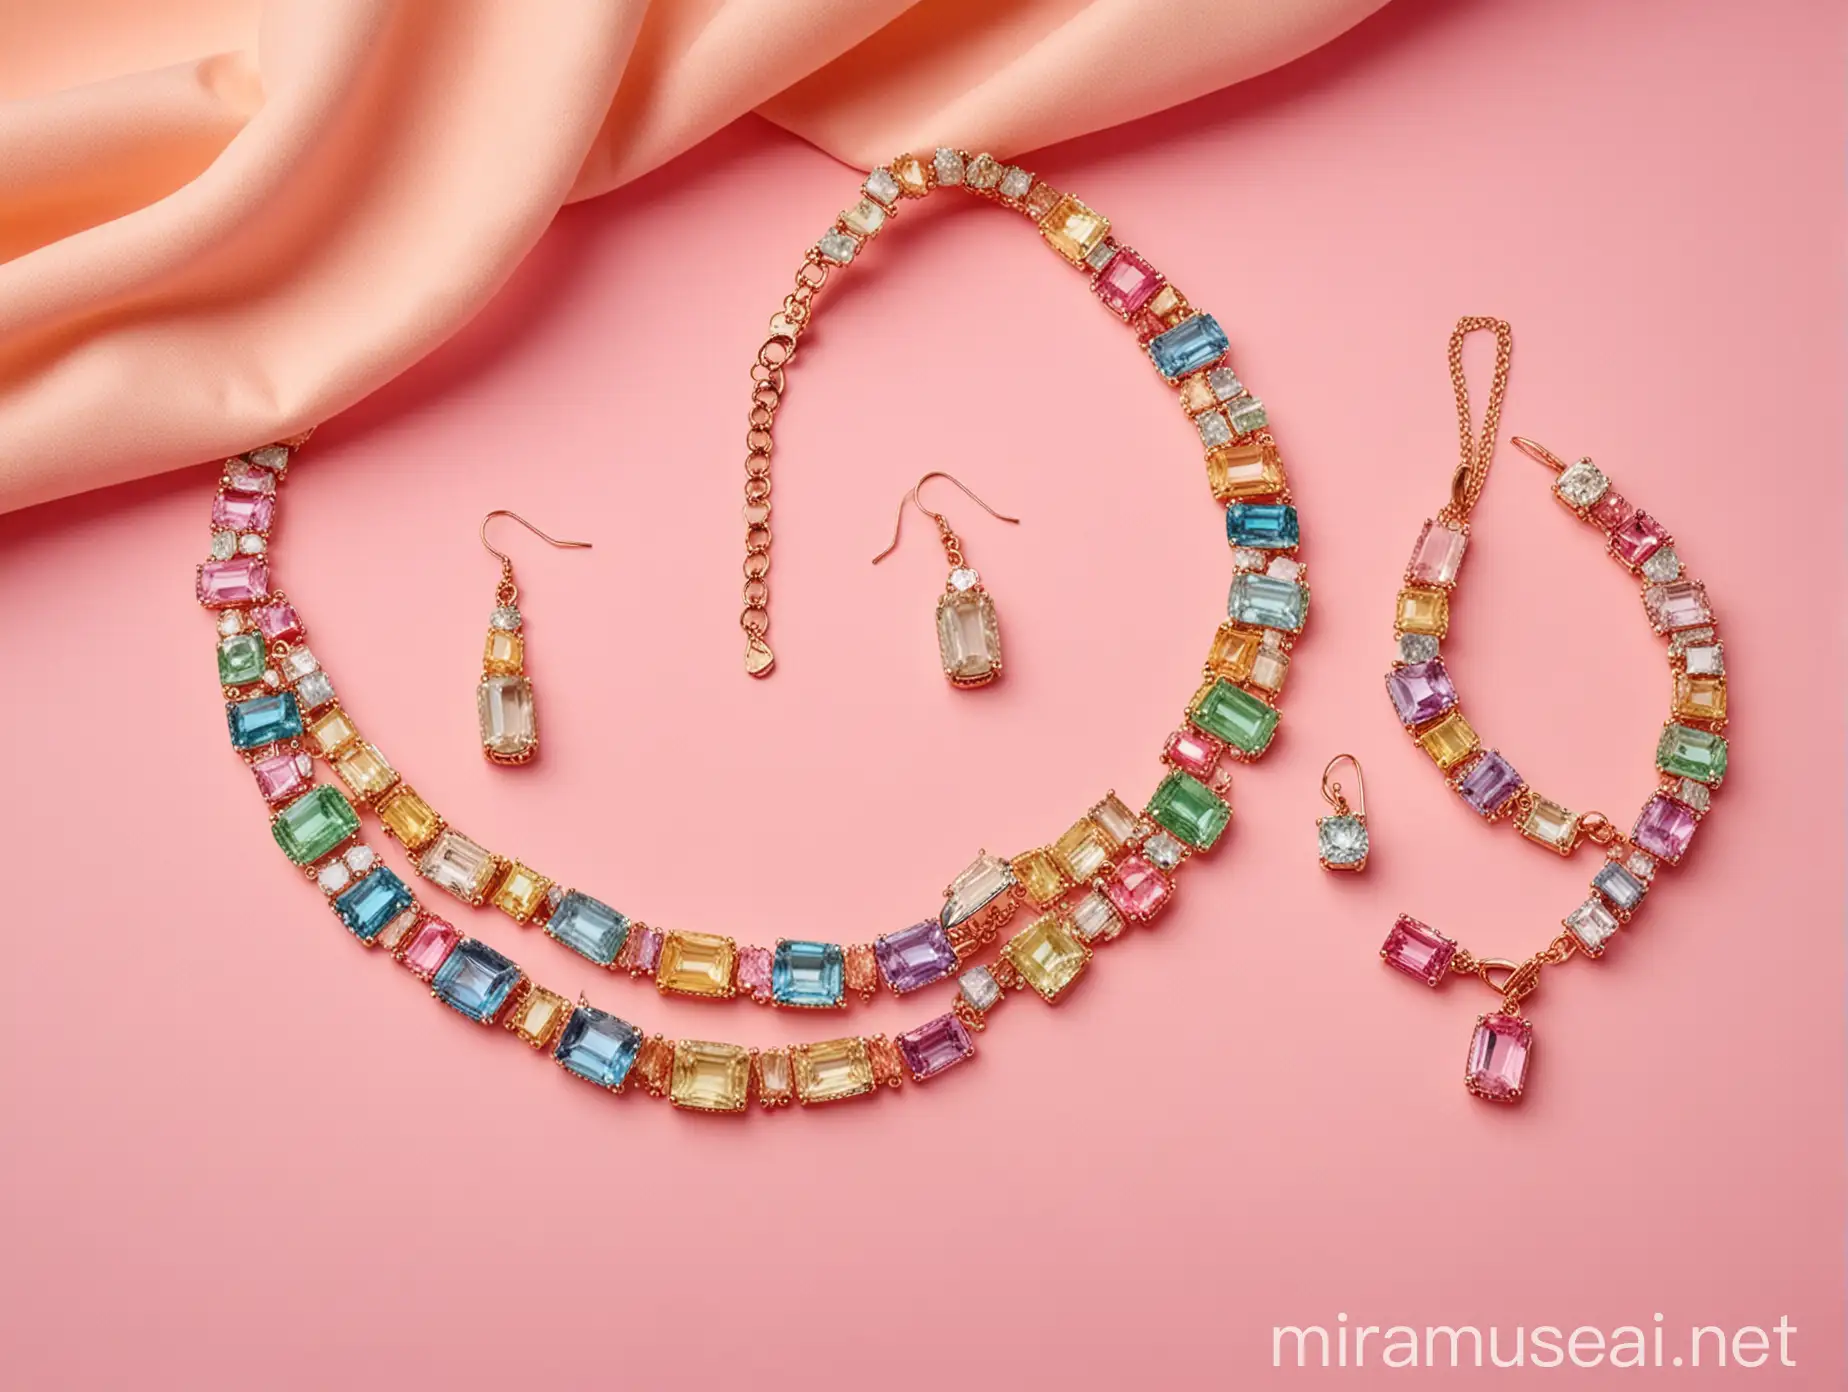 Vibrant Baguette Gemstone Jewelry Set with Pastel Background